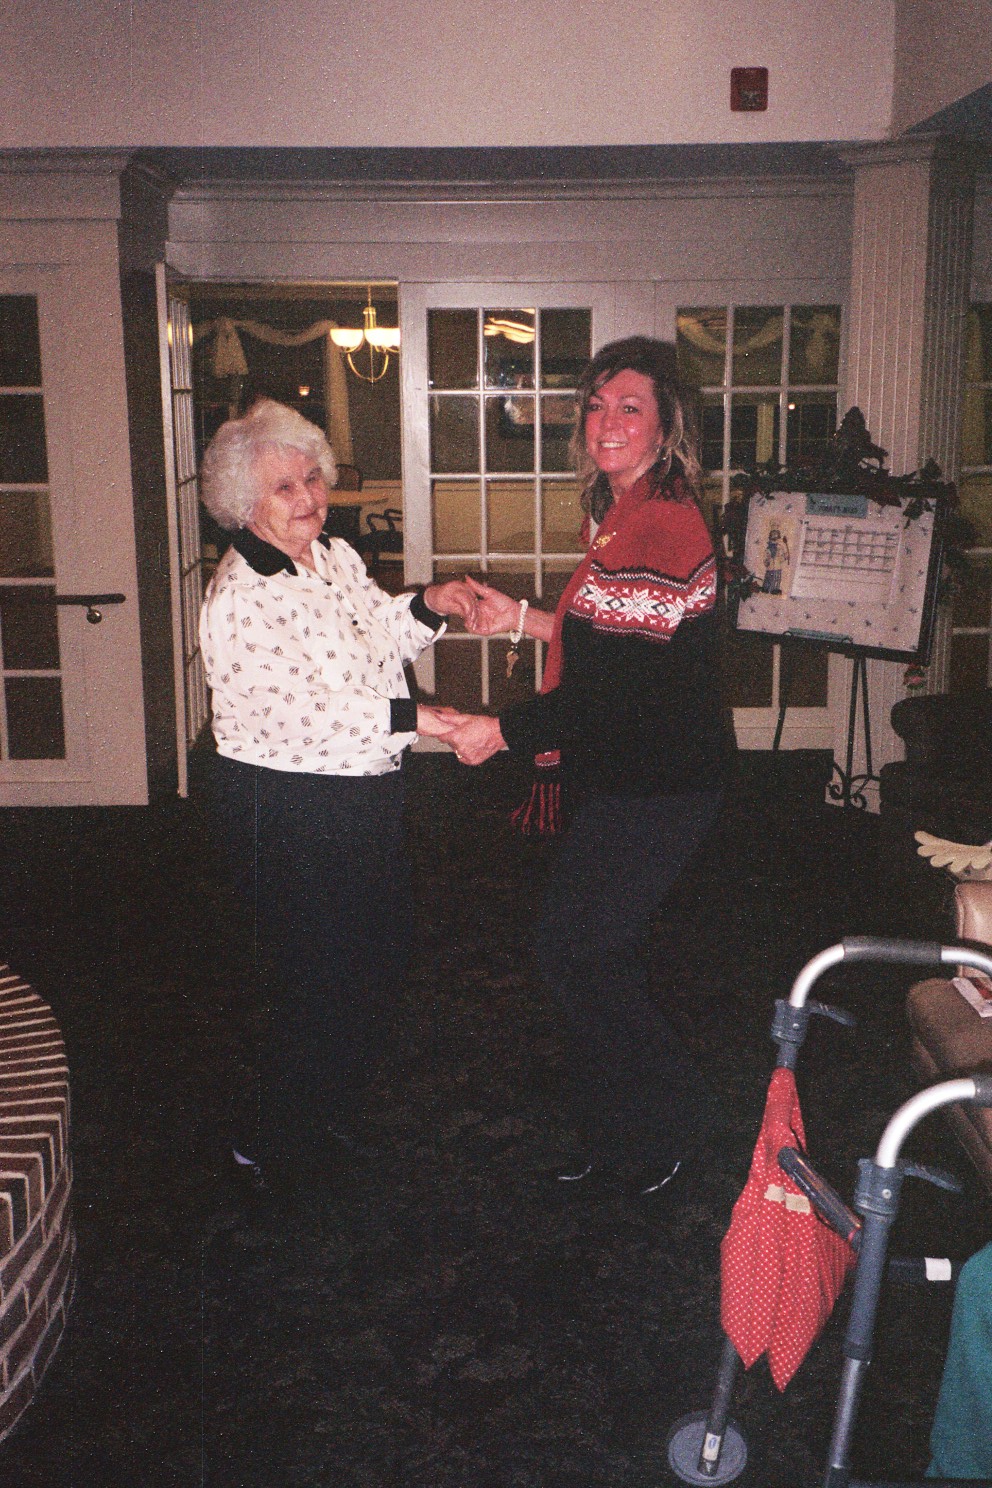 The Residents and staff at Outlook Pointe can really cut a rug!
